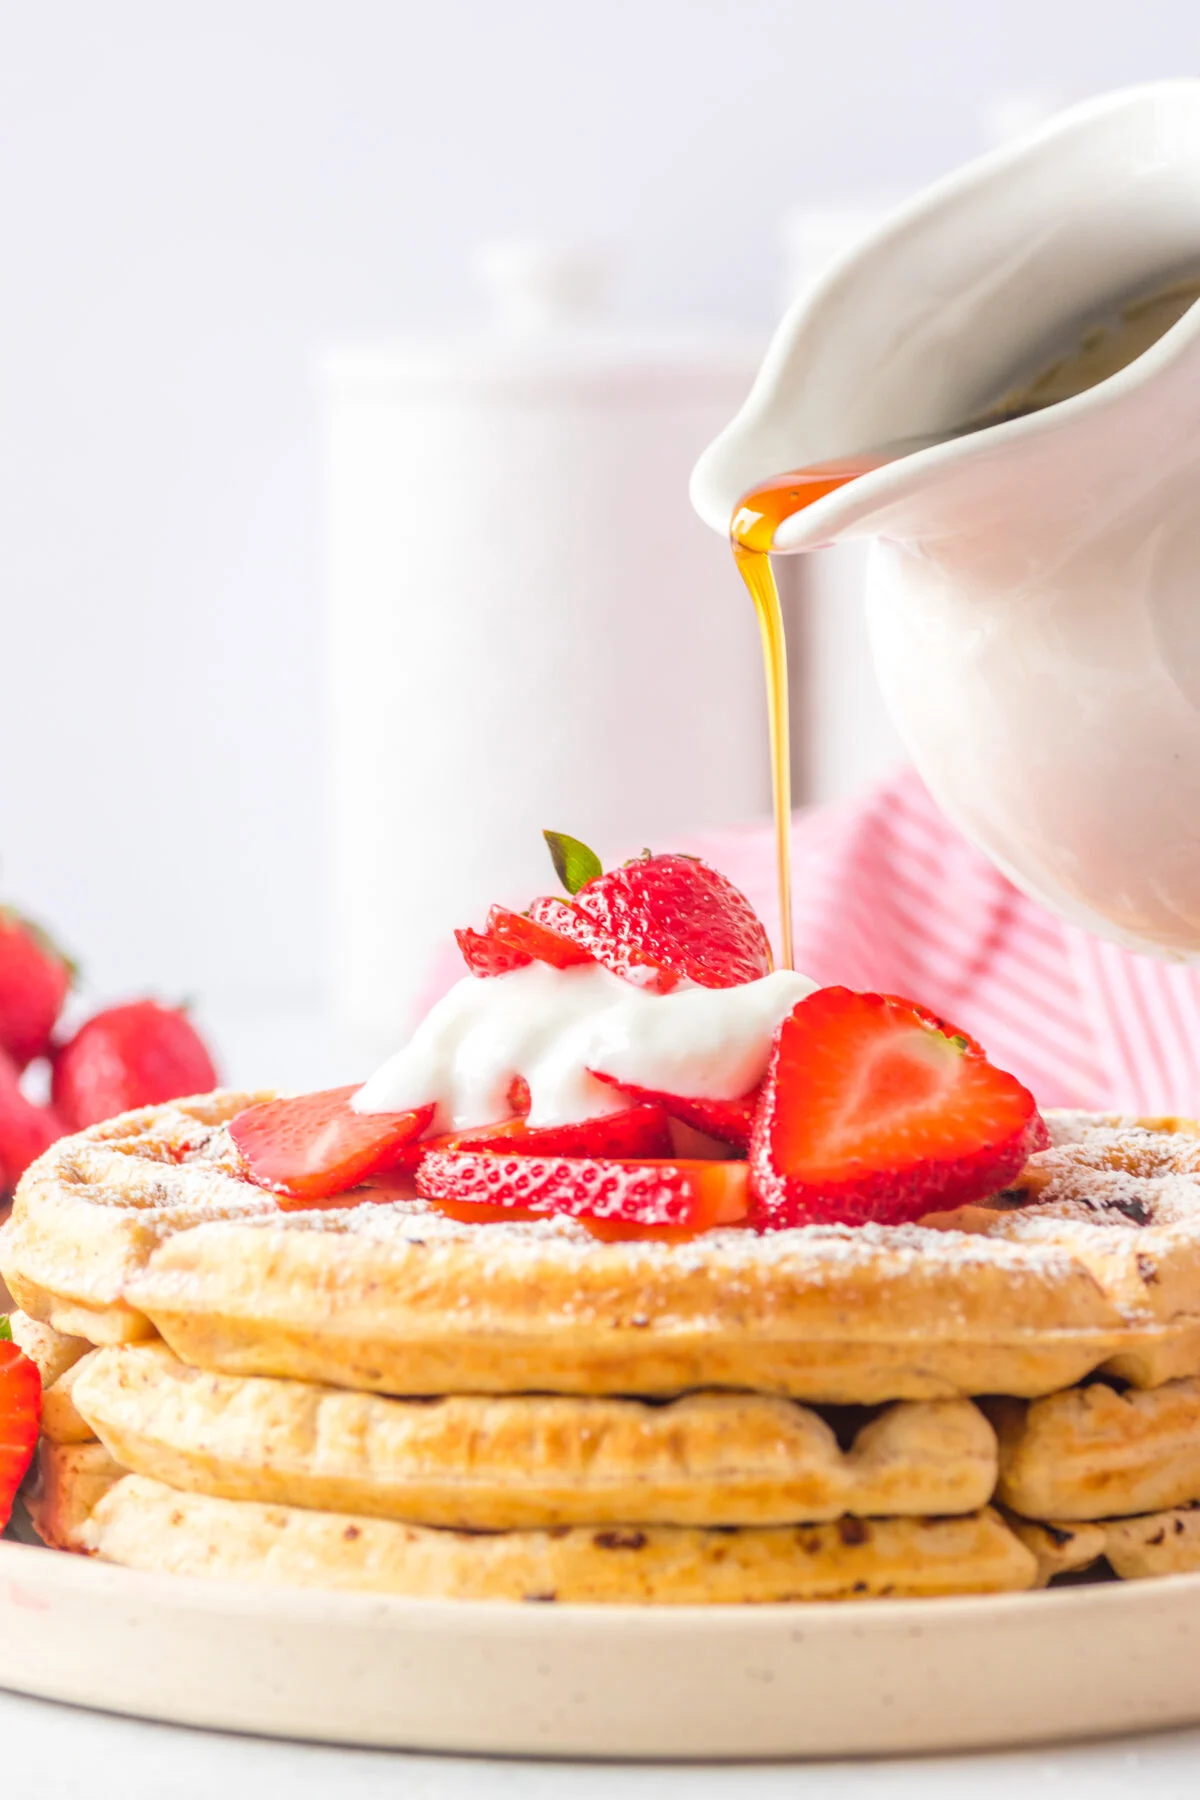 This recipe makes homemade strawberry waffles that are light, fluffy, and loaded with fresh strawberries. The perfect weekend breakfast treat!